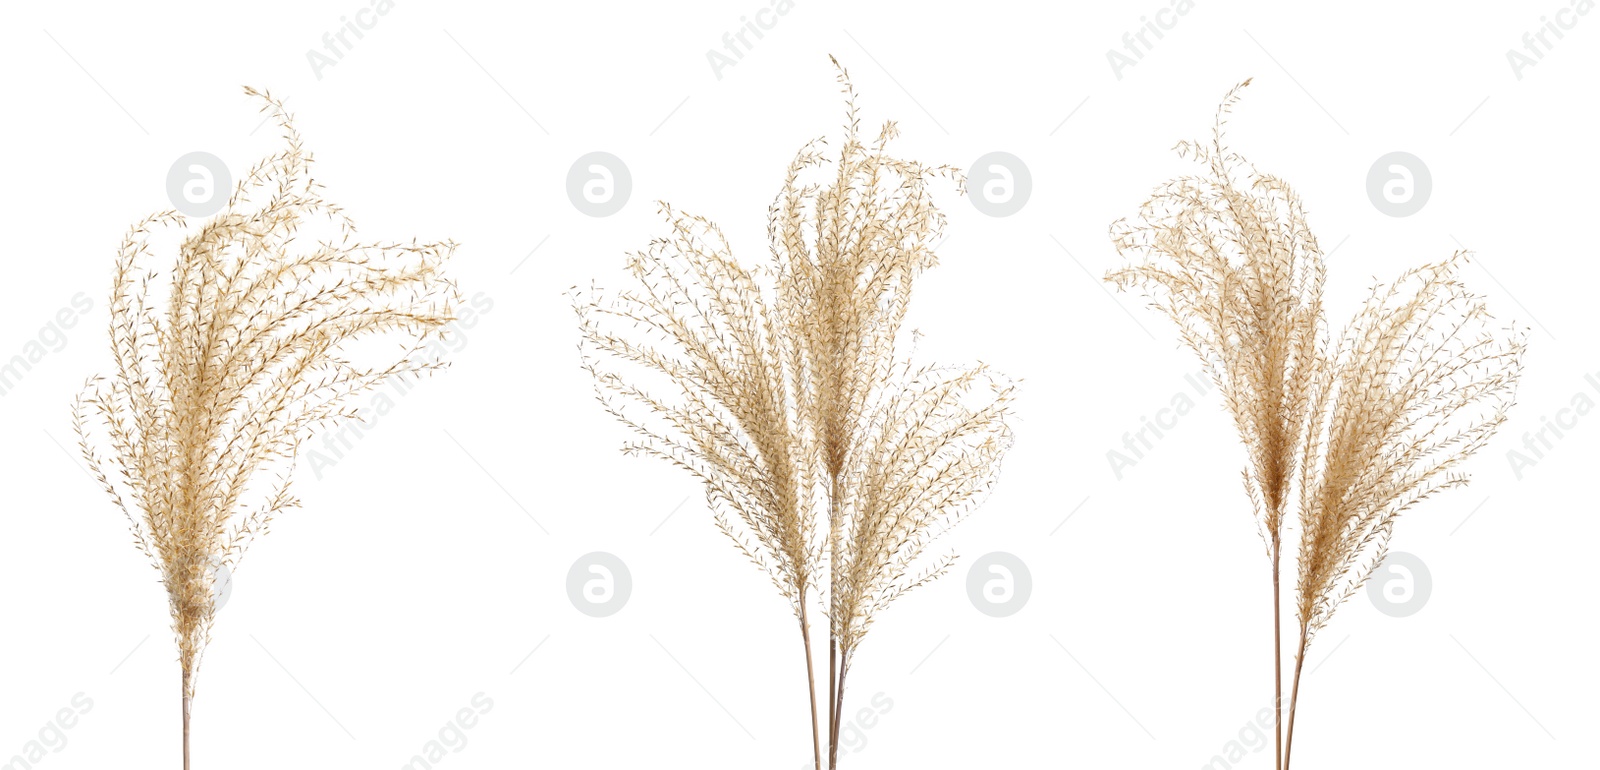 Image of Set with beautiful decorative dry flowers on white background, banner design 